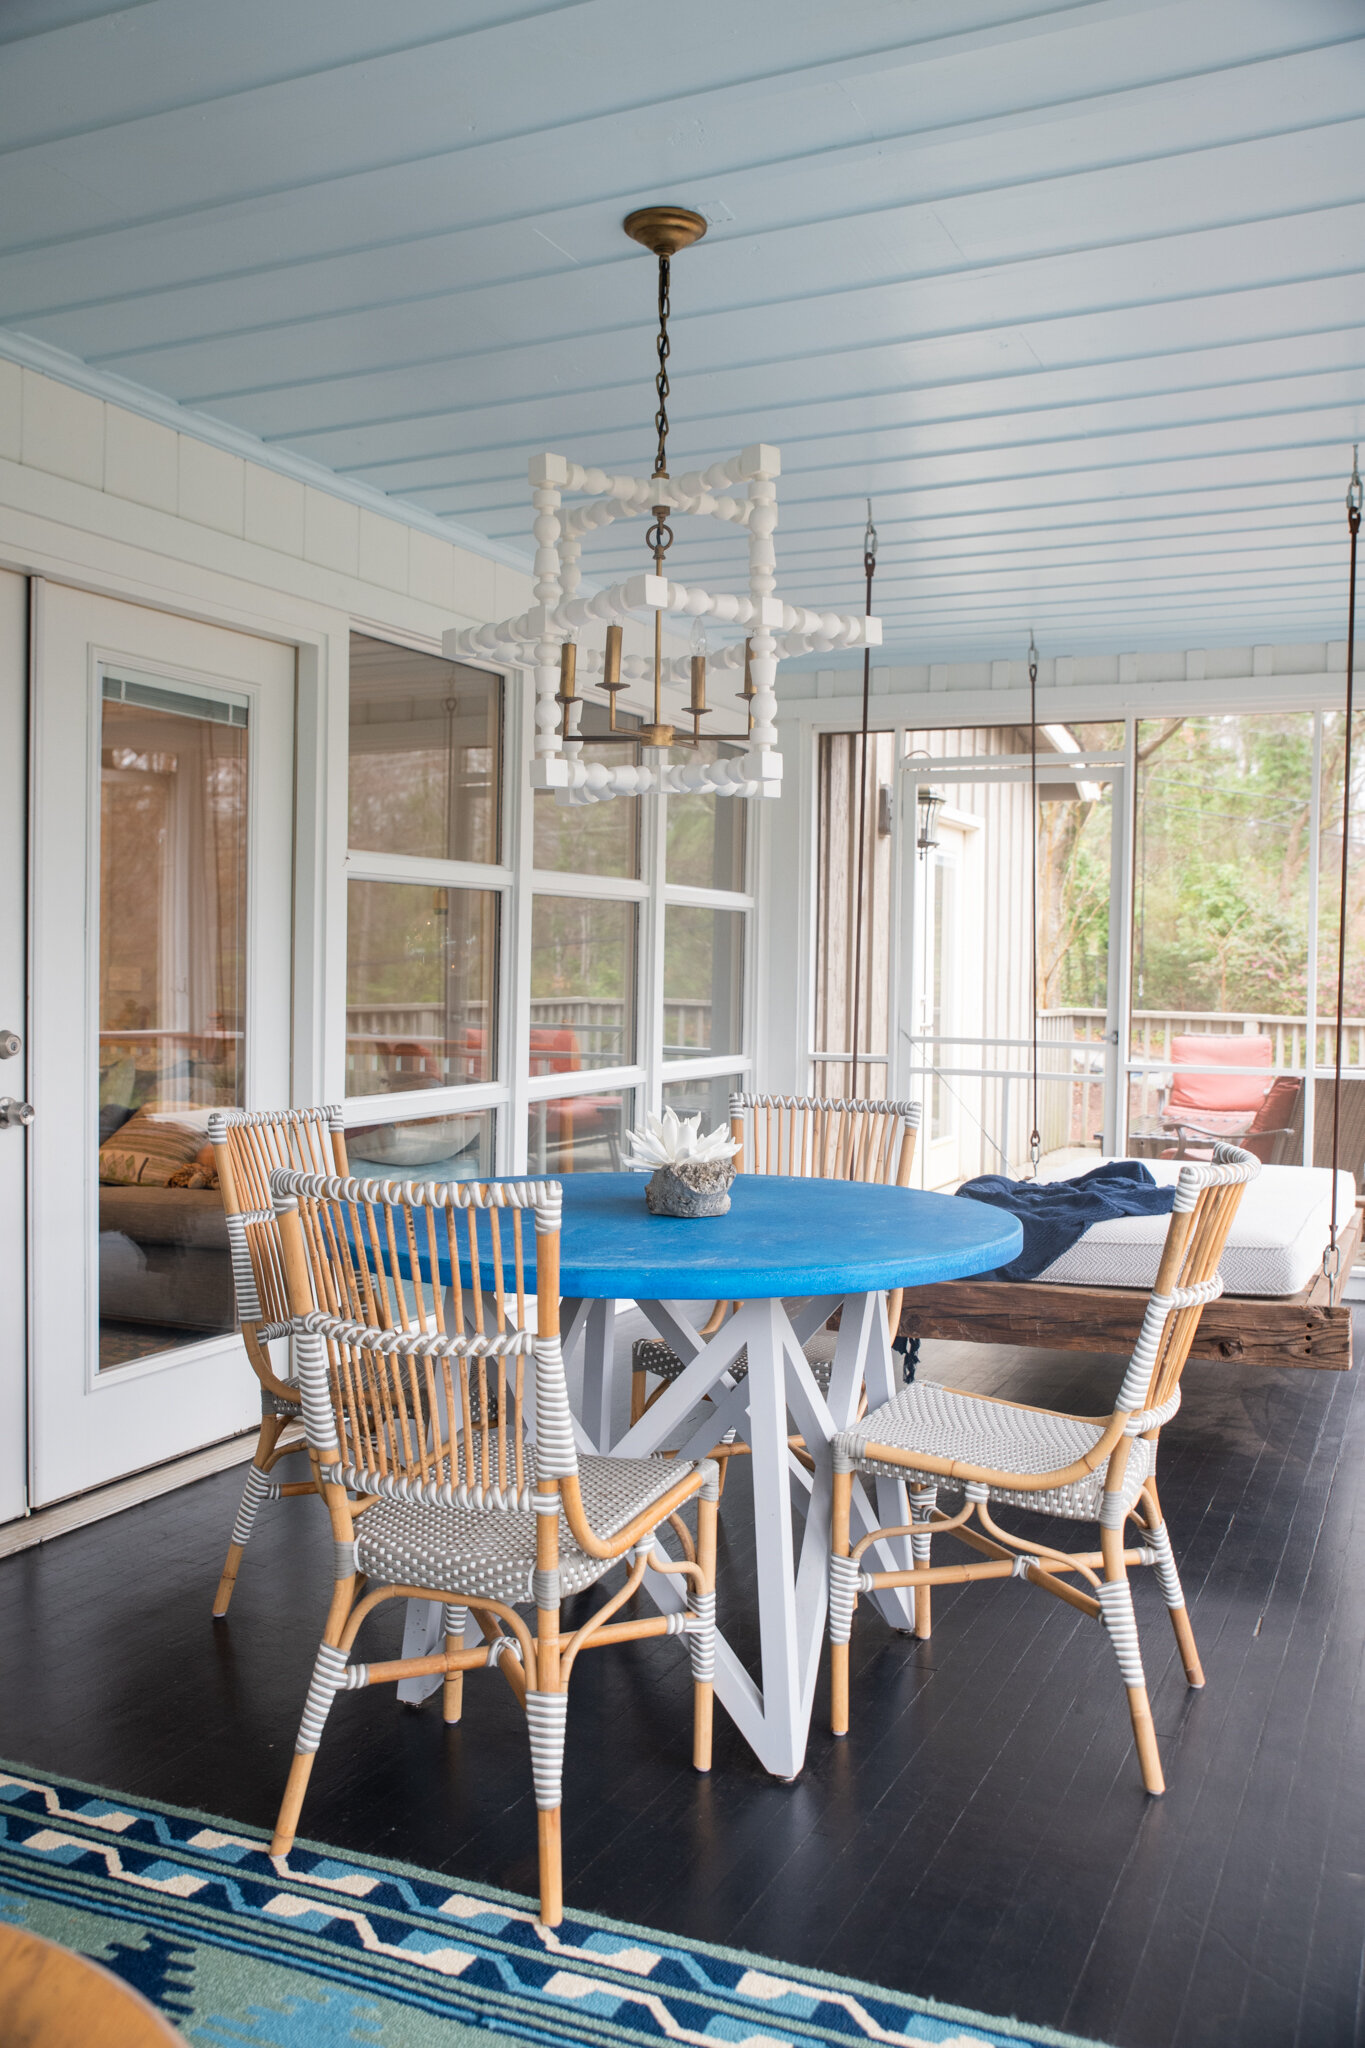 Dwell-Chic-Colorful-Coastal-Porch-Blue-Table-And-Swing.jpg